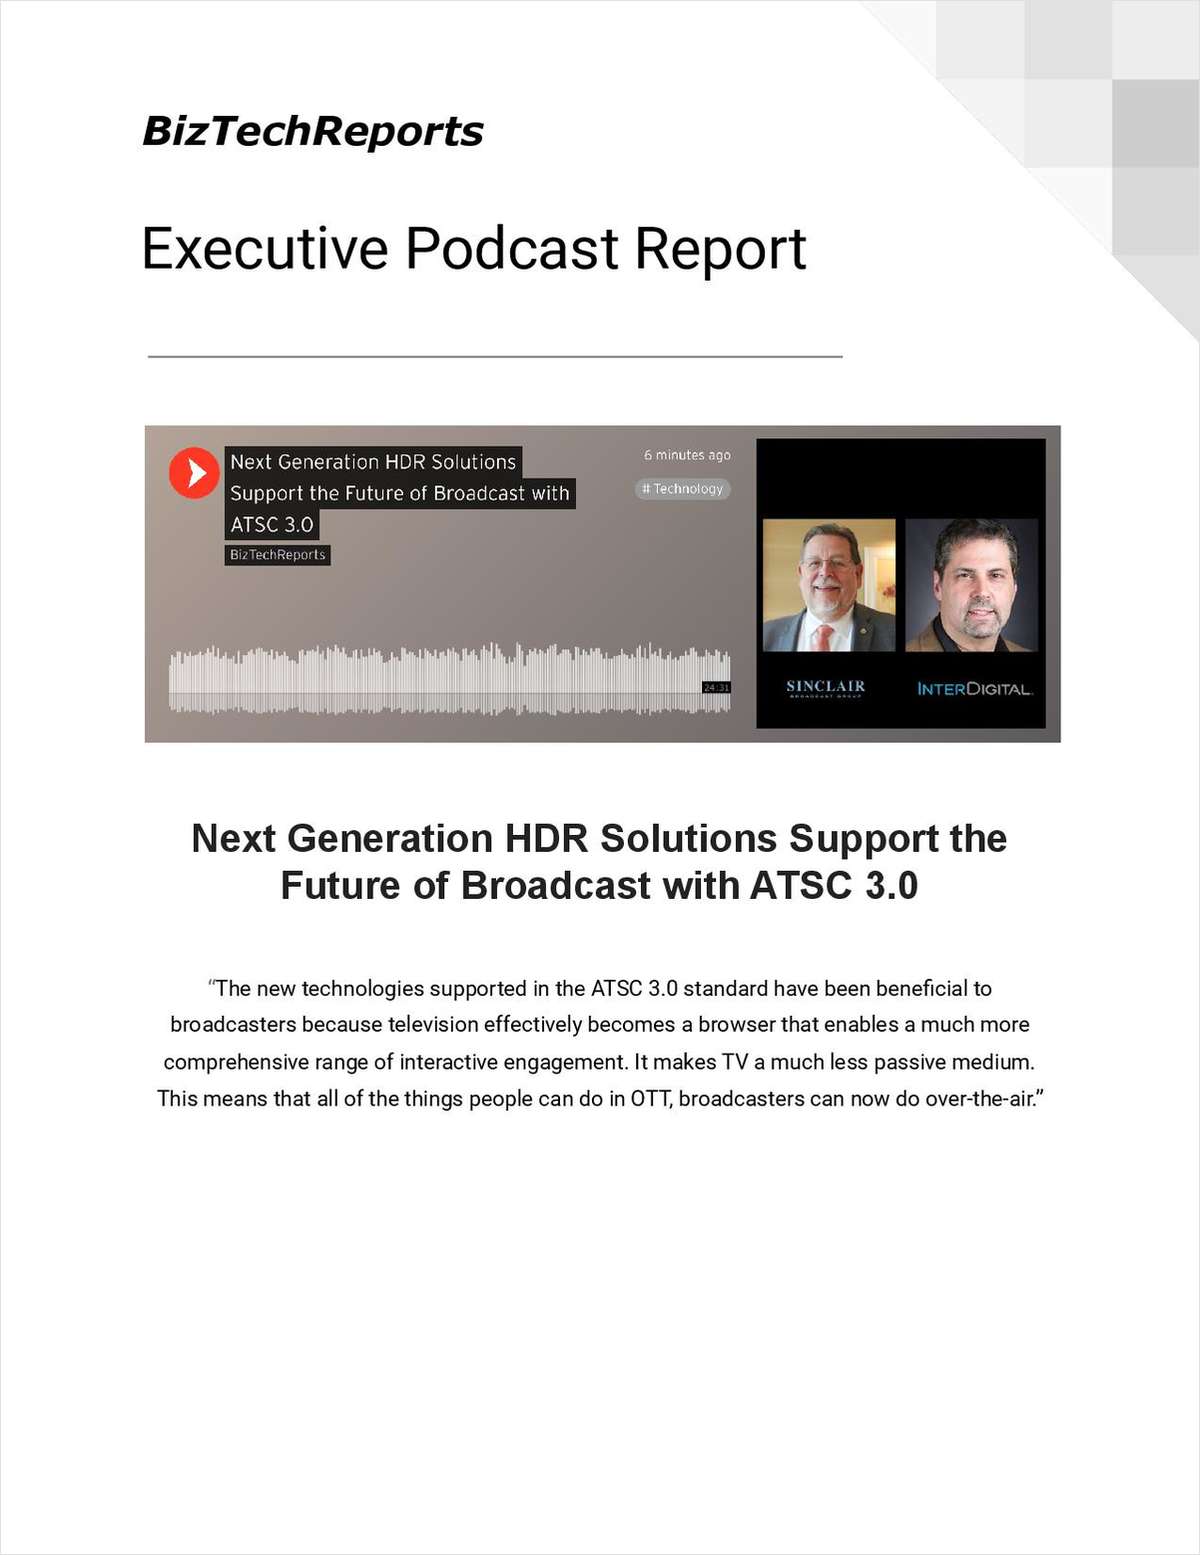 Next Generation HDR Solutions Support the Future of Broadcast with ATSC 3.0